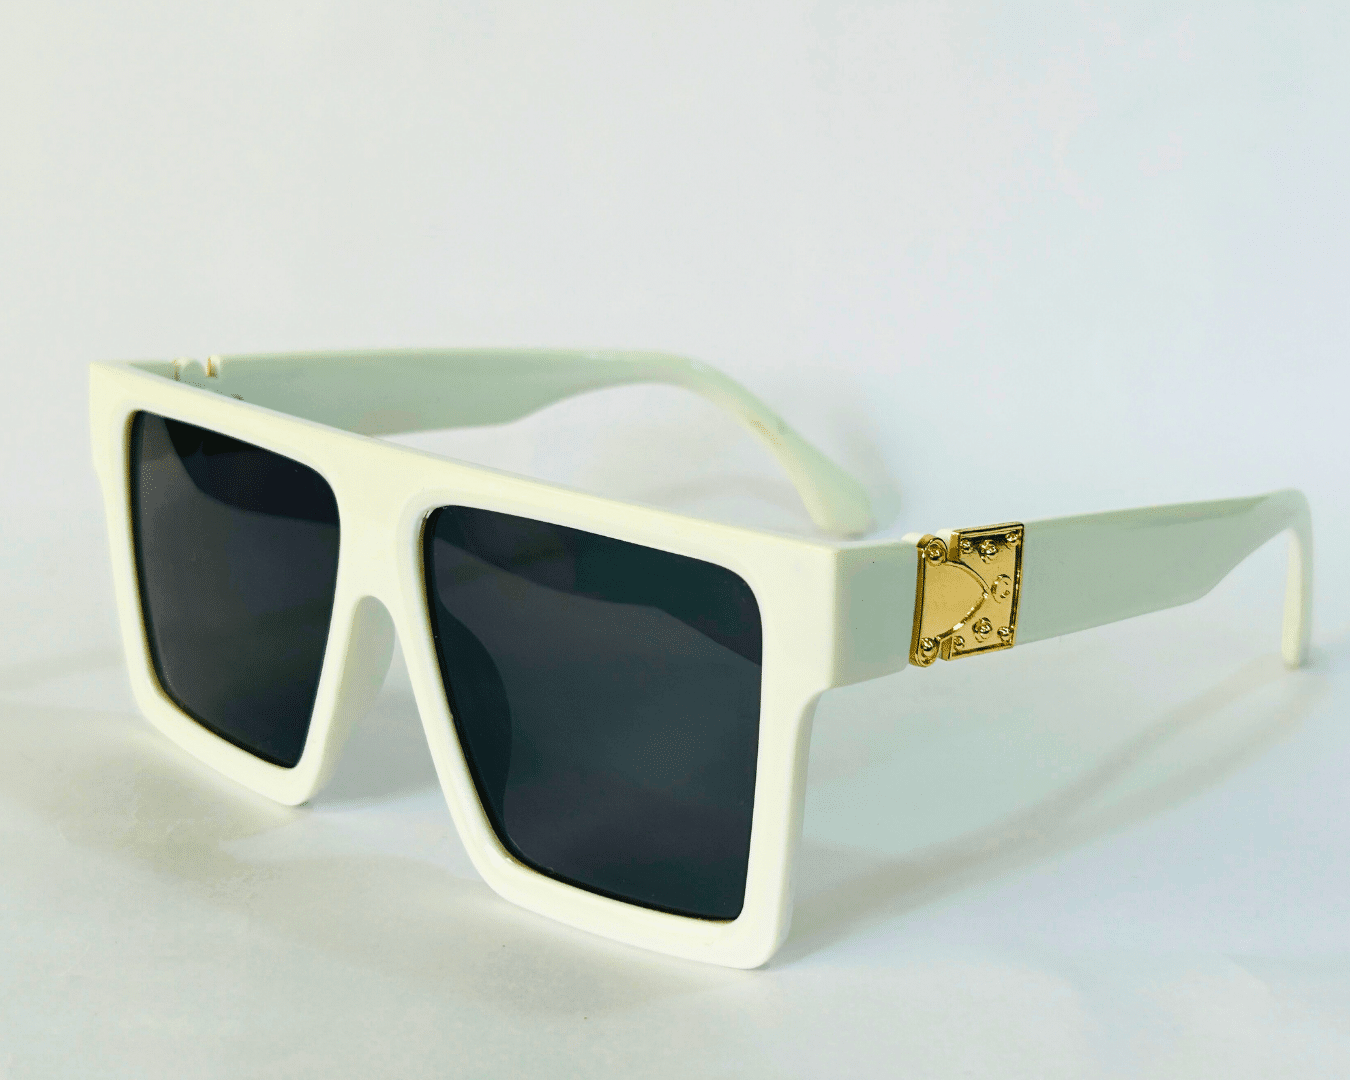 Lookout Shades Black x White